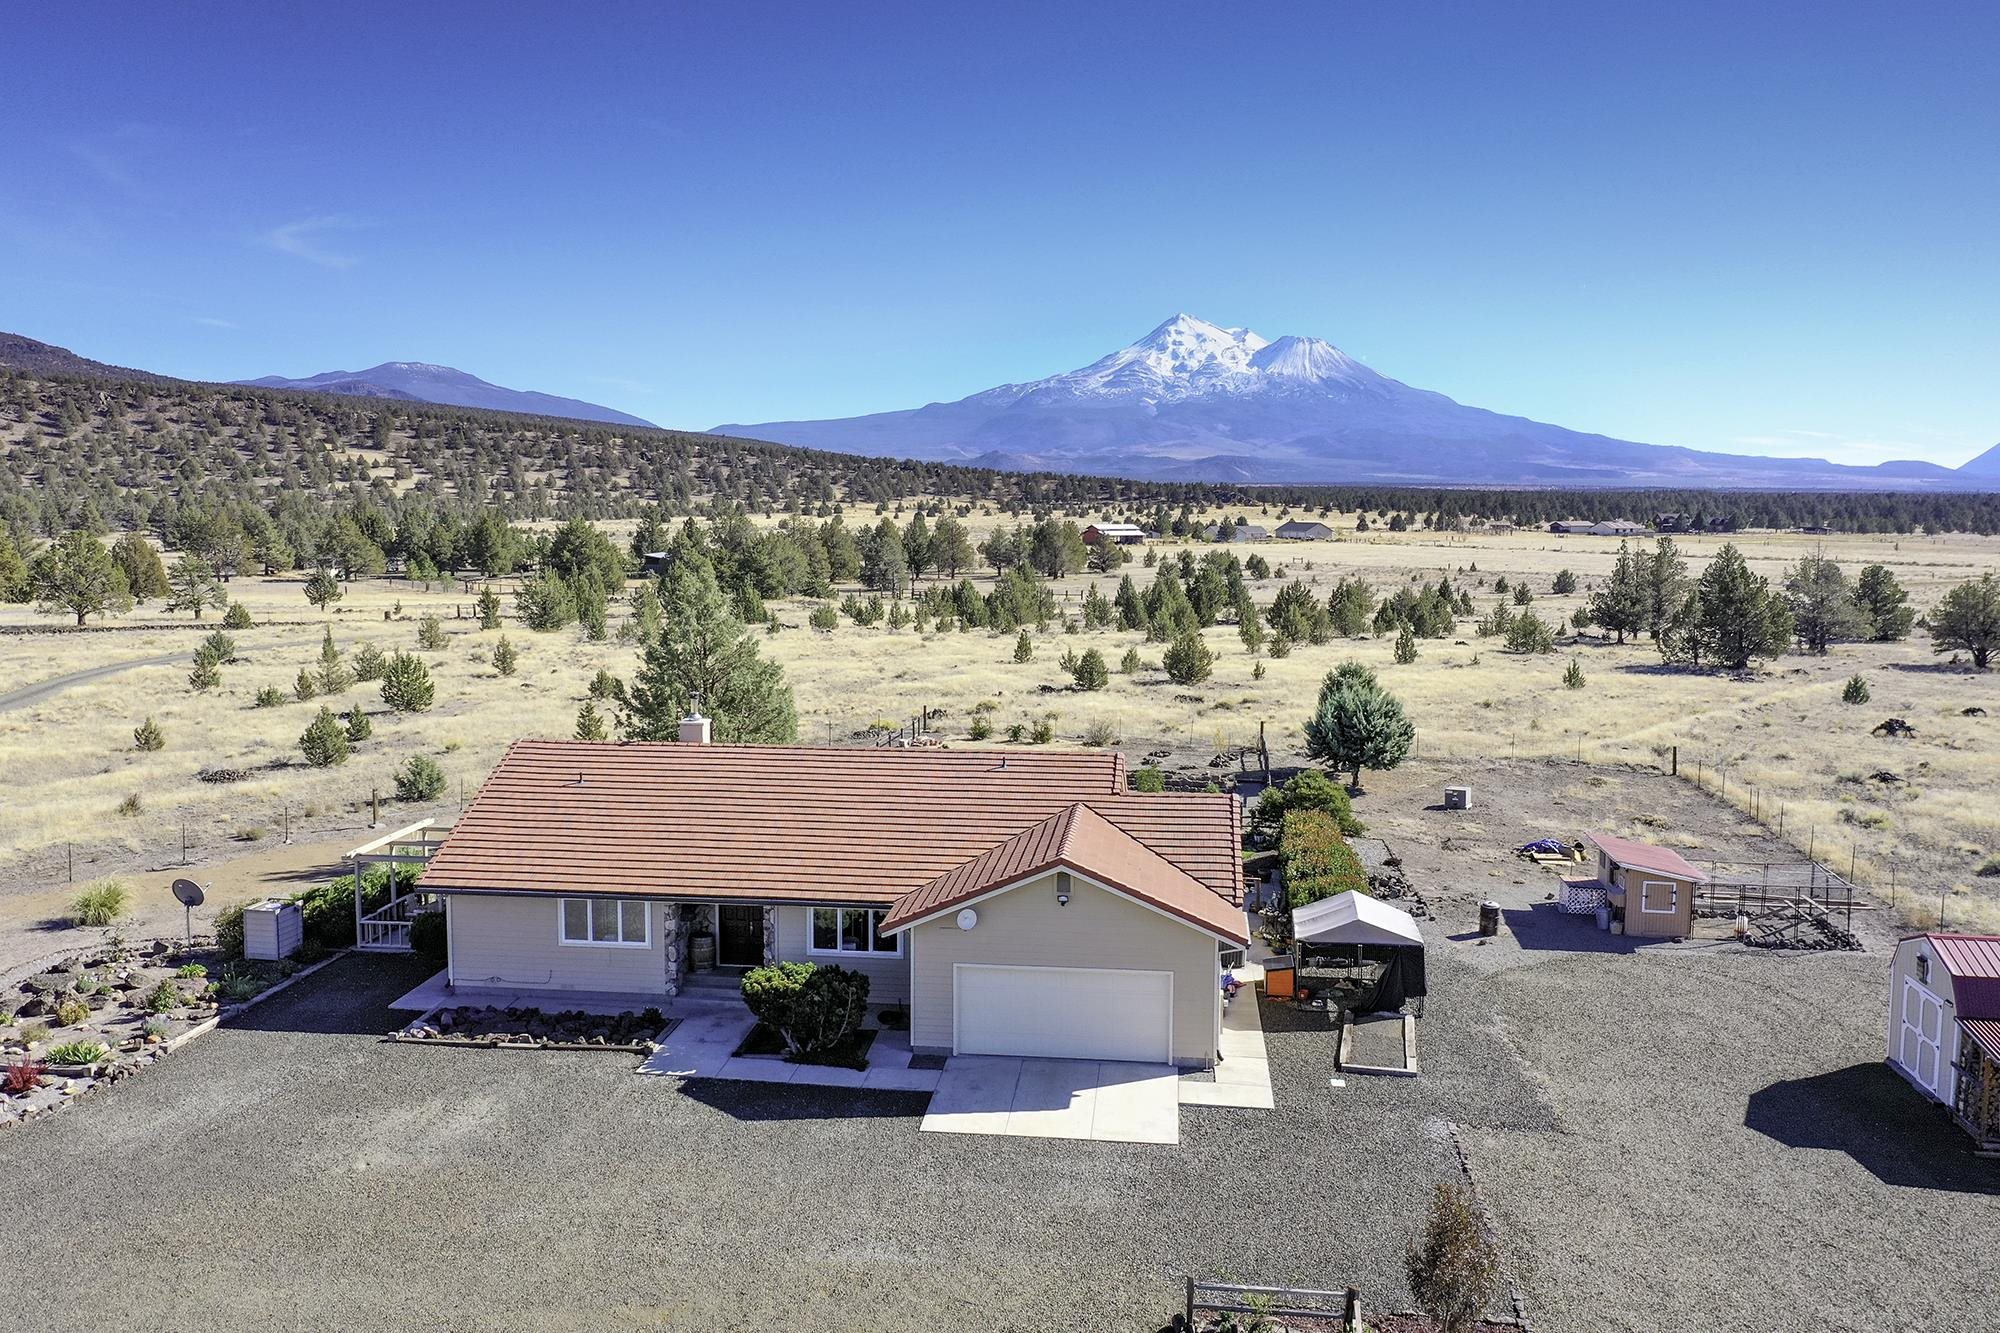 Breathtaking views of Mt. Shasta from this nicely situated 3 bed/ 2 bath home. Quiet setting with home set off the road. Walk into a large entry and through to the living room with stunning views. Dining room open to both living room and updated kitchen with luxurious stainless steel appliances. Master suite has doors to the back patio, 2 closets, and updated bathroom. Both guest bedrooms are a good size for closet storage. The home boasts a large laundry/ mud room between the kitchen and attached garage. Plenty of elbow room on this large property over 54 acres. Additional detached garage/ work shop along with large metal covered parking with side covered area as well. Driveway and areas around buildings are nicely graveled. Several additional out buildings/ sheds for storage. A rare find!